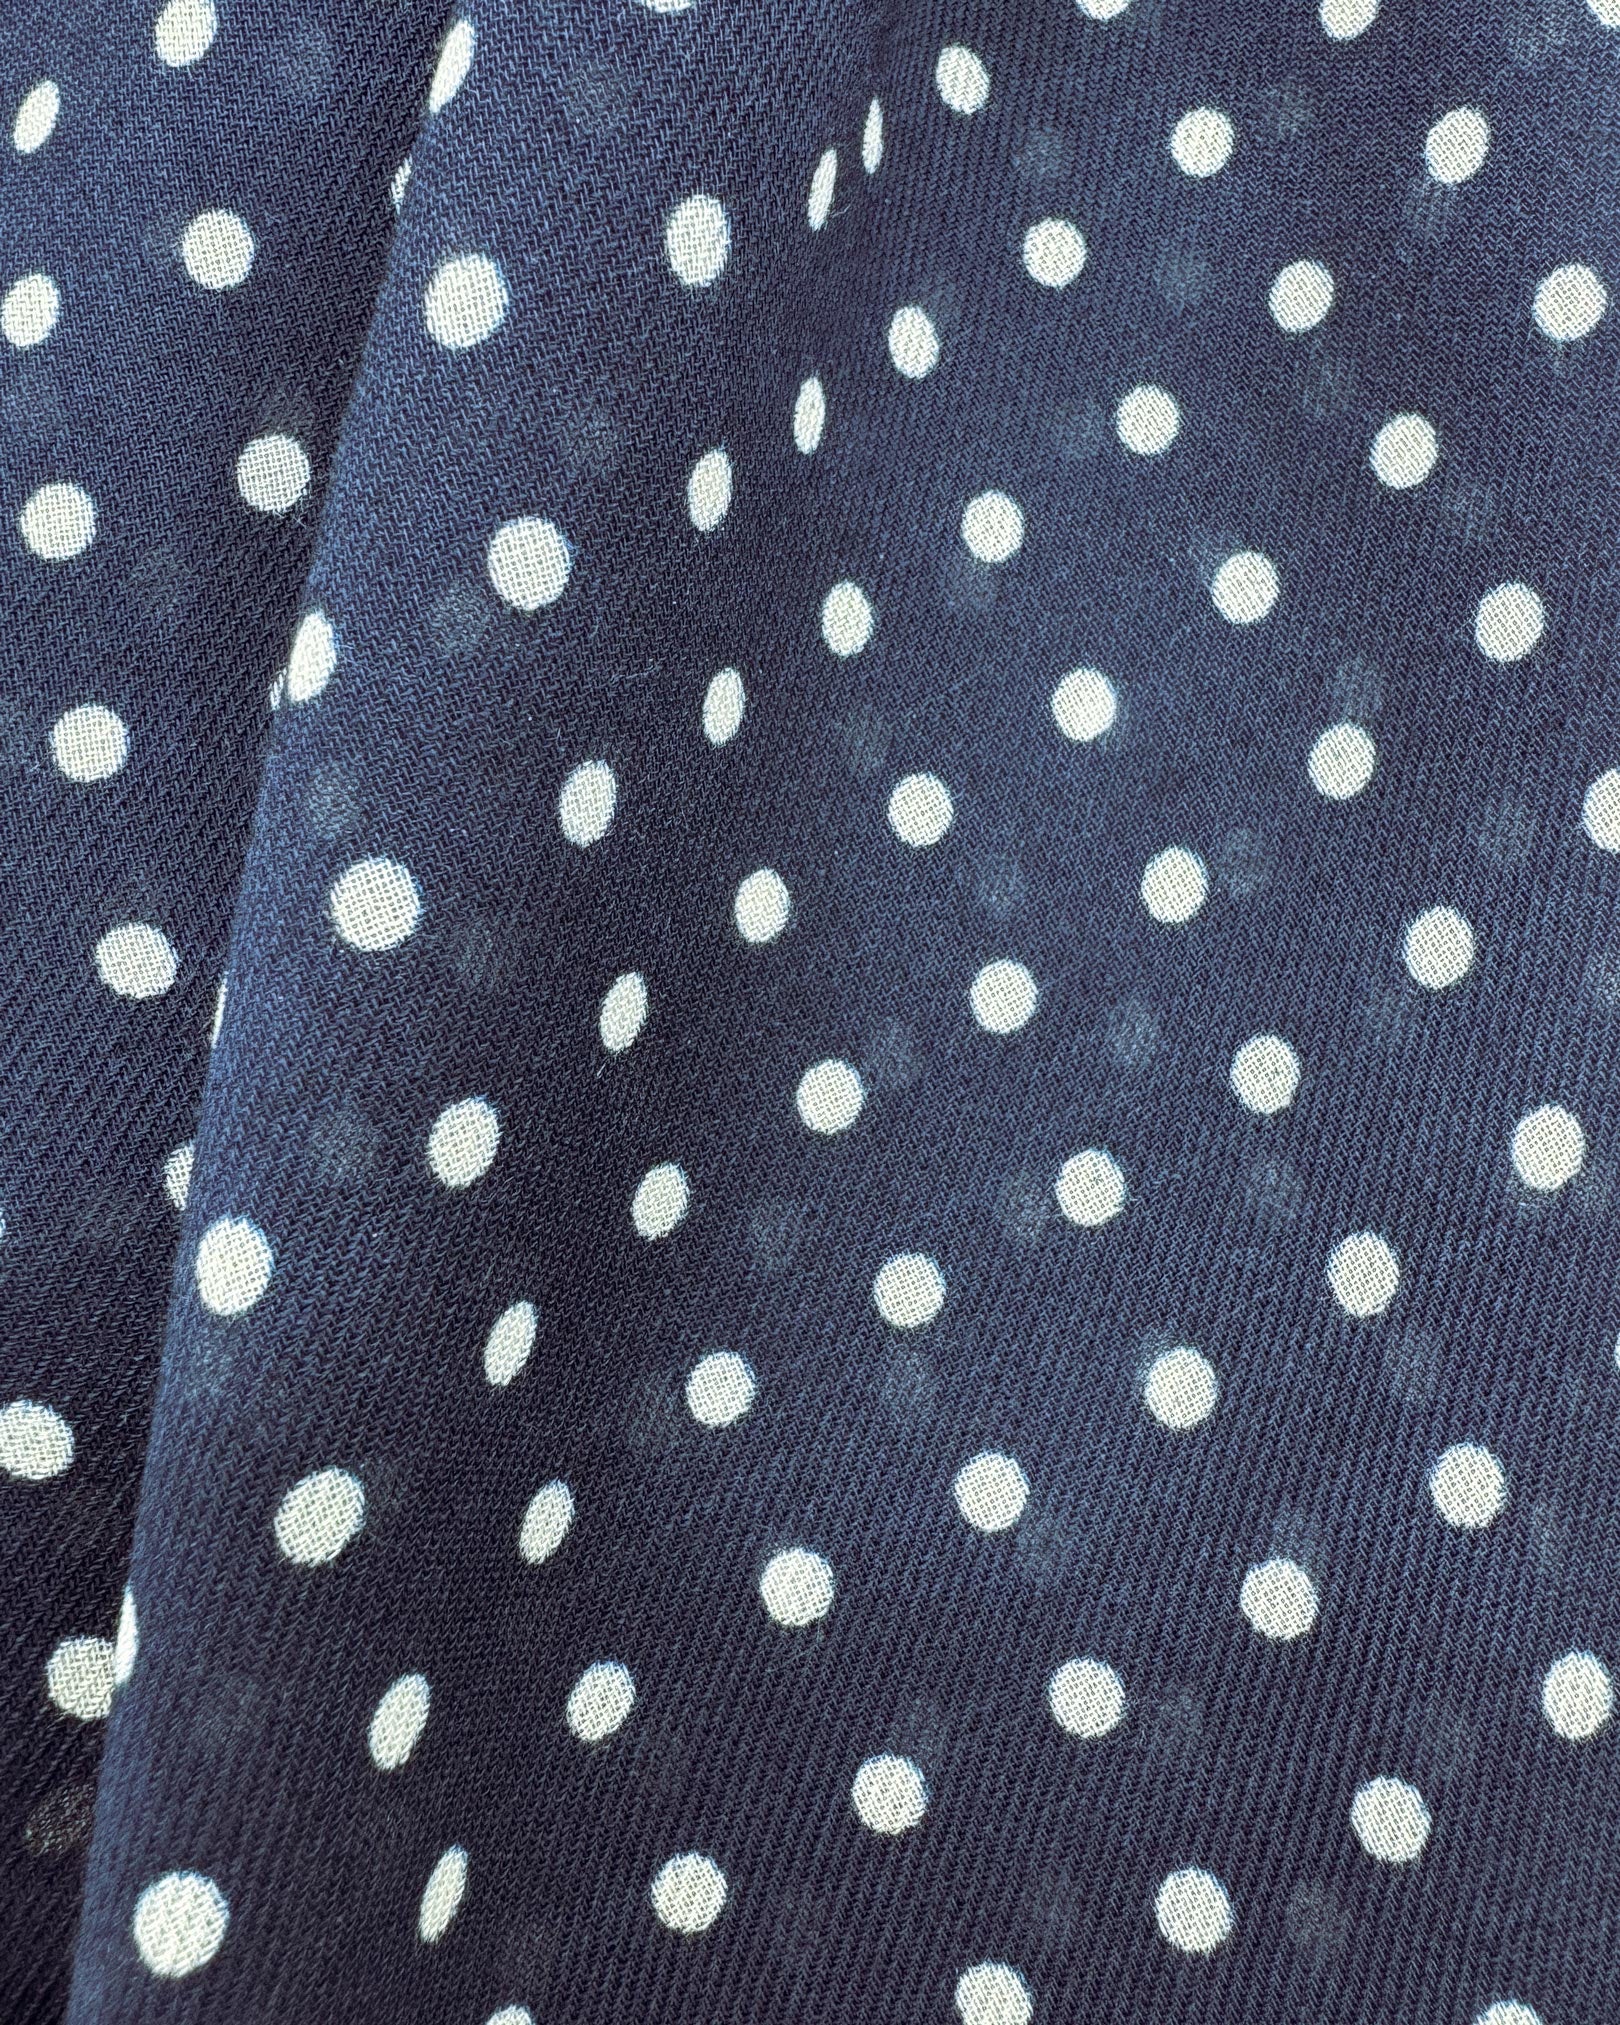 A flat, close up view of 'The Westminster' wide scarf. Clearly showing the modal and wool fabric and attractive white polka dot pattern against a navy-blue background.